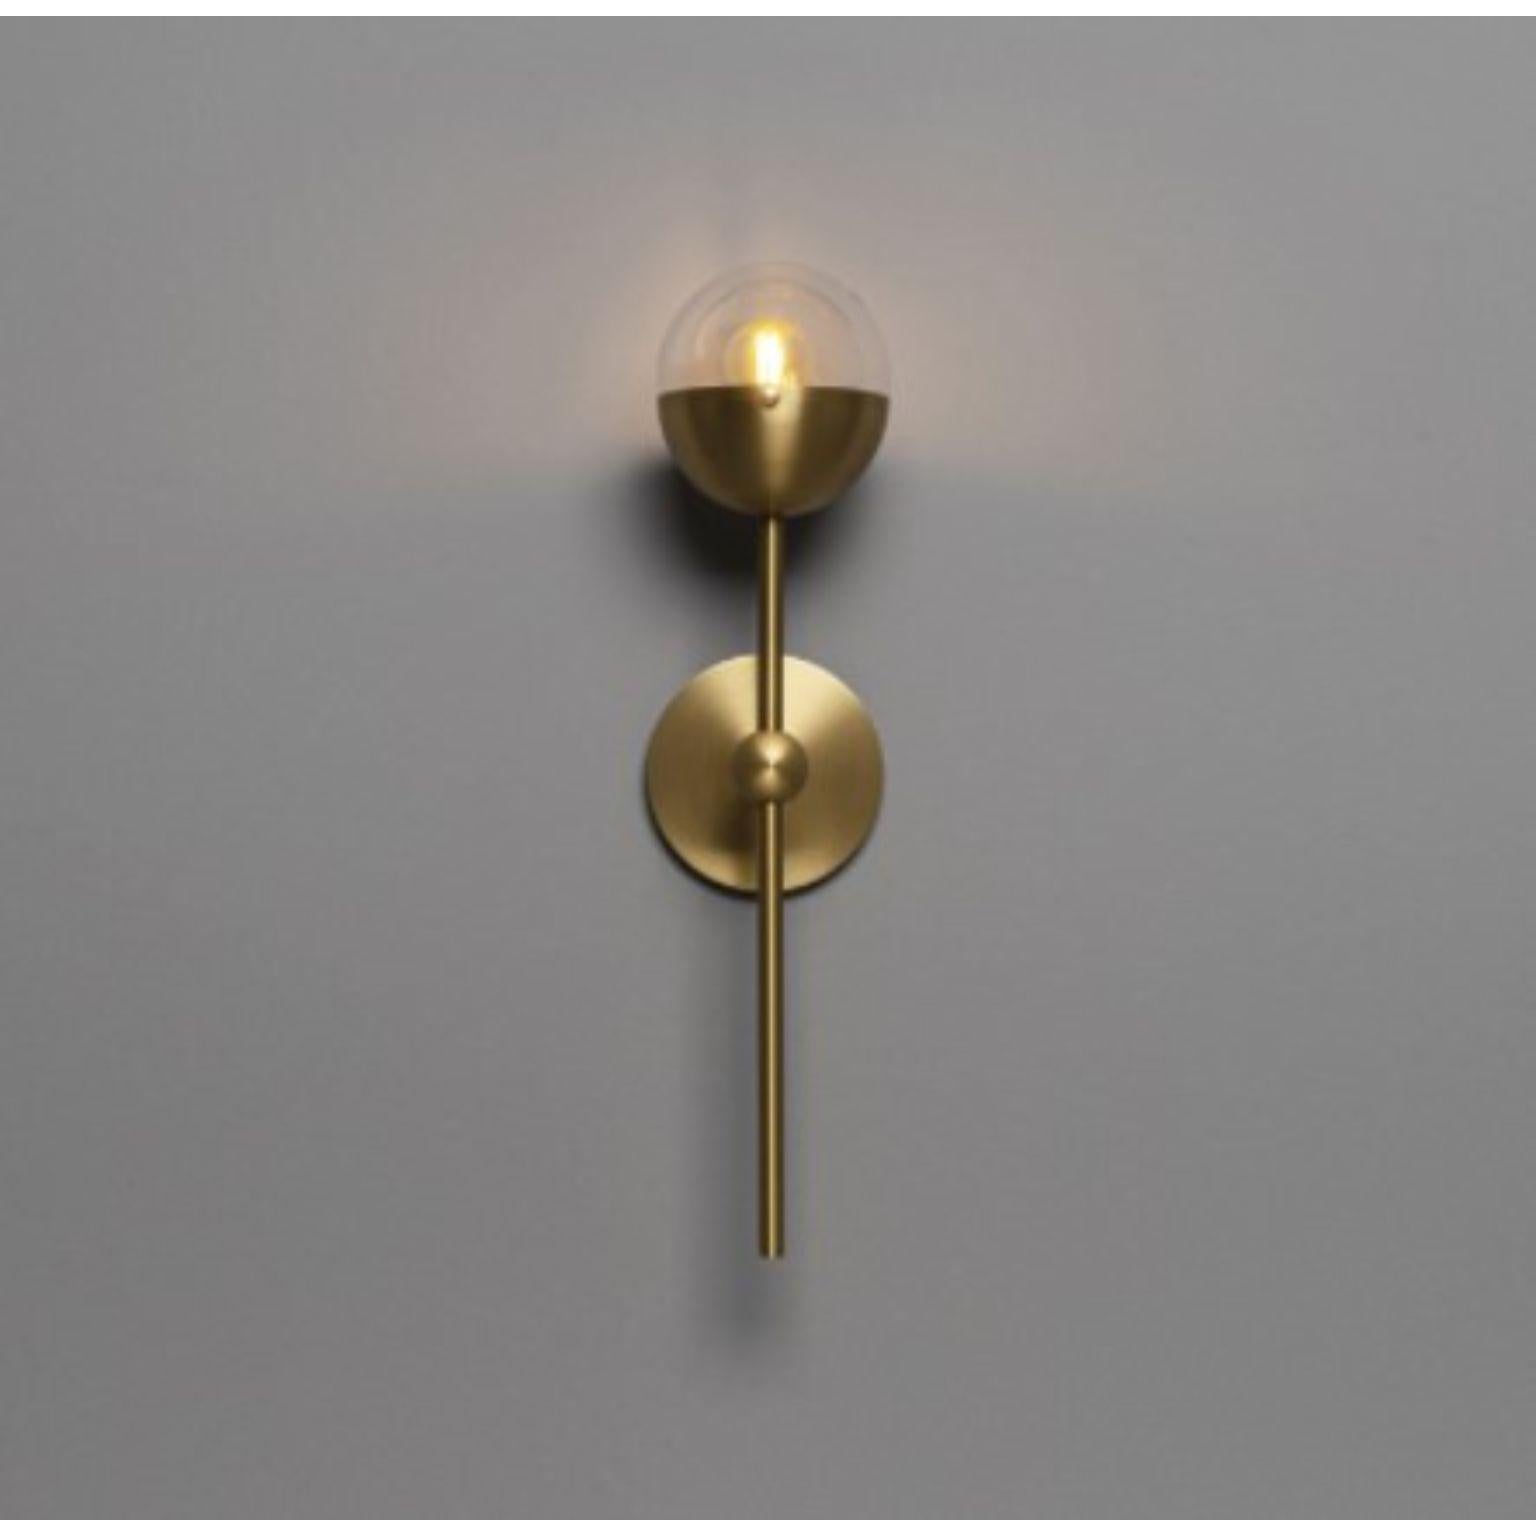 Molecule single wall sconce by Schwung
Dimensions: W 12.5 x D 14.4 x H 50.8 cm
Materials: Brass, opal glass
Weight: 1.7 kg

Finishes available: Black gunmetal, polished nickel, brass
Other sizes available.

 Schwung is a german word, and loosely